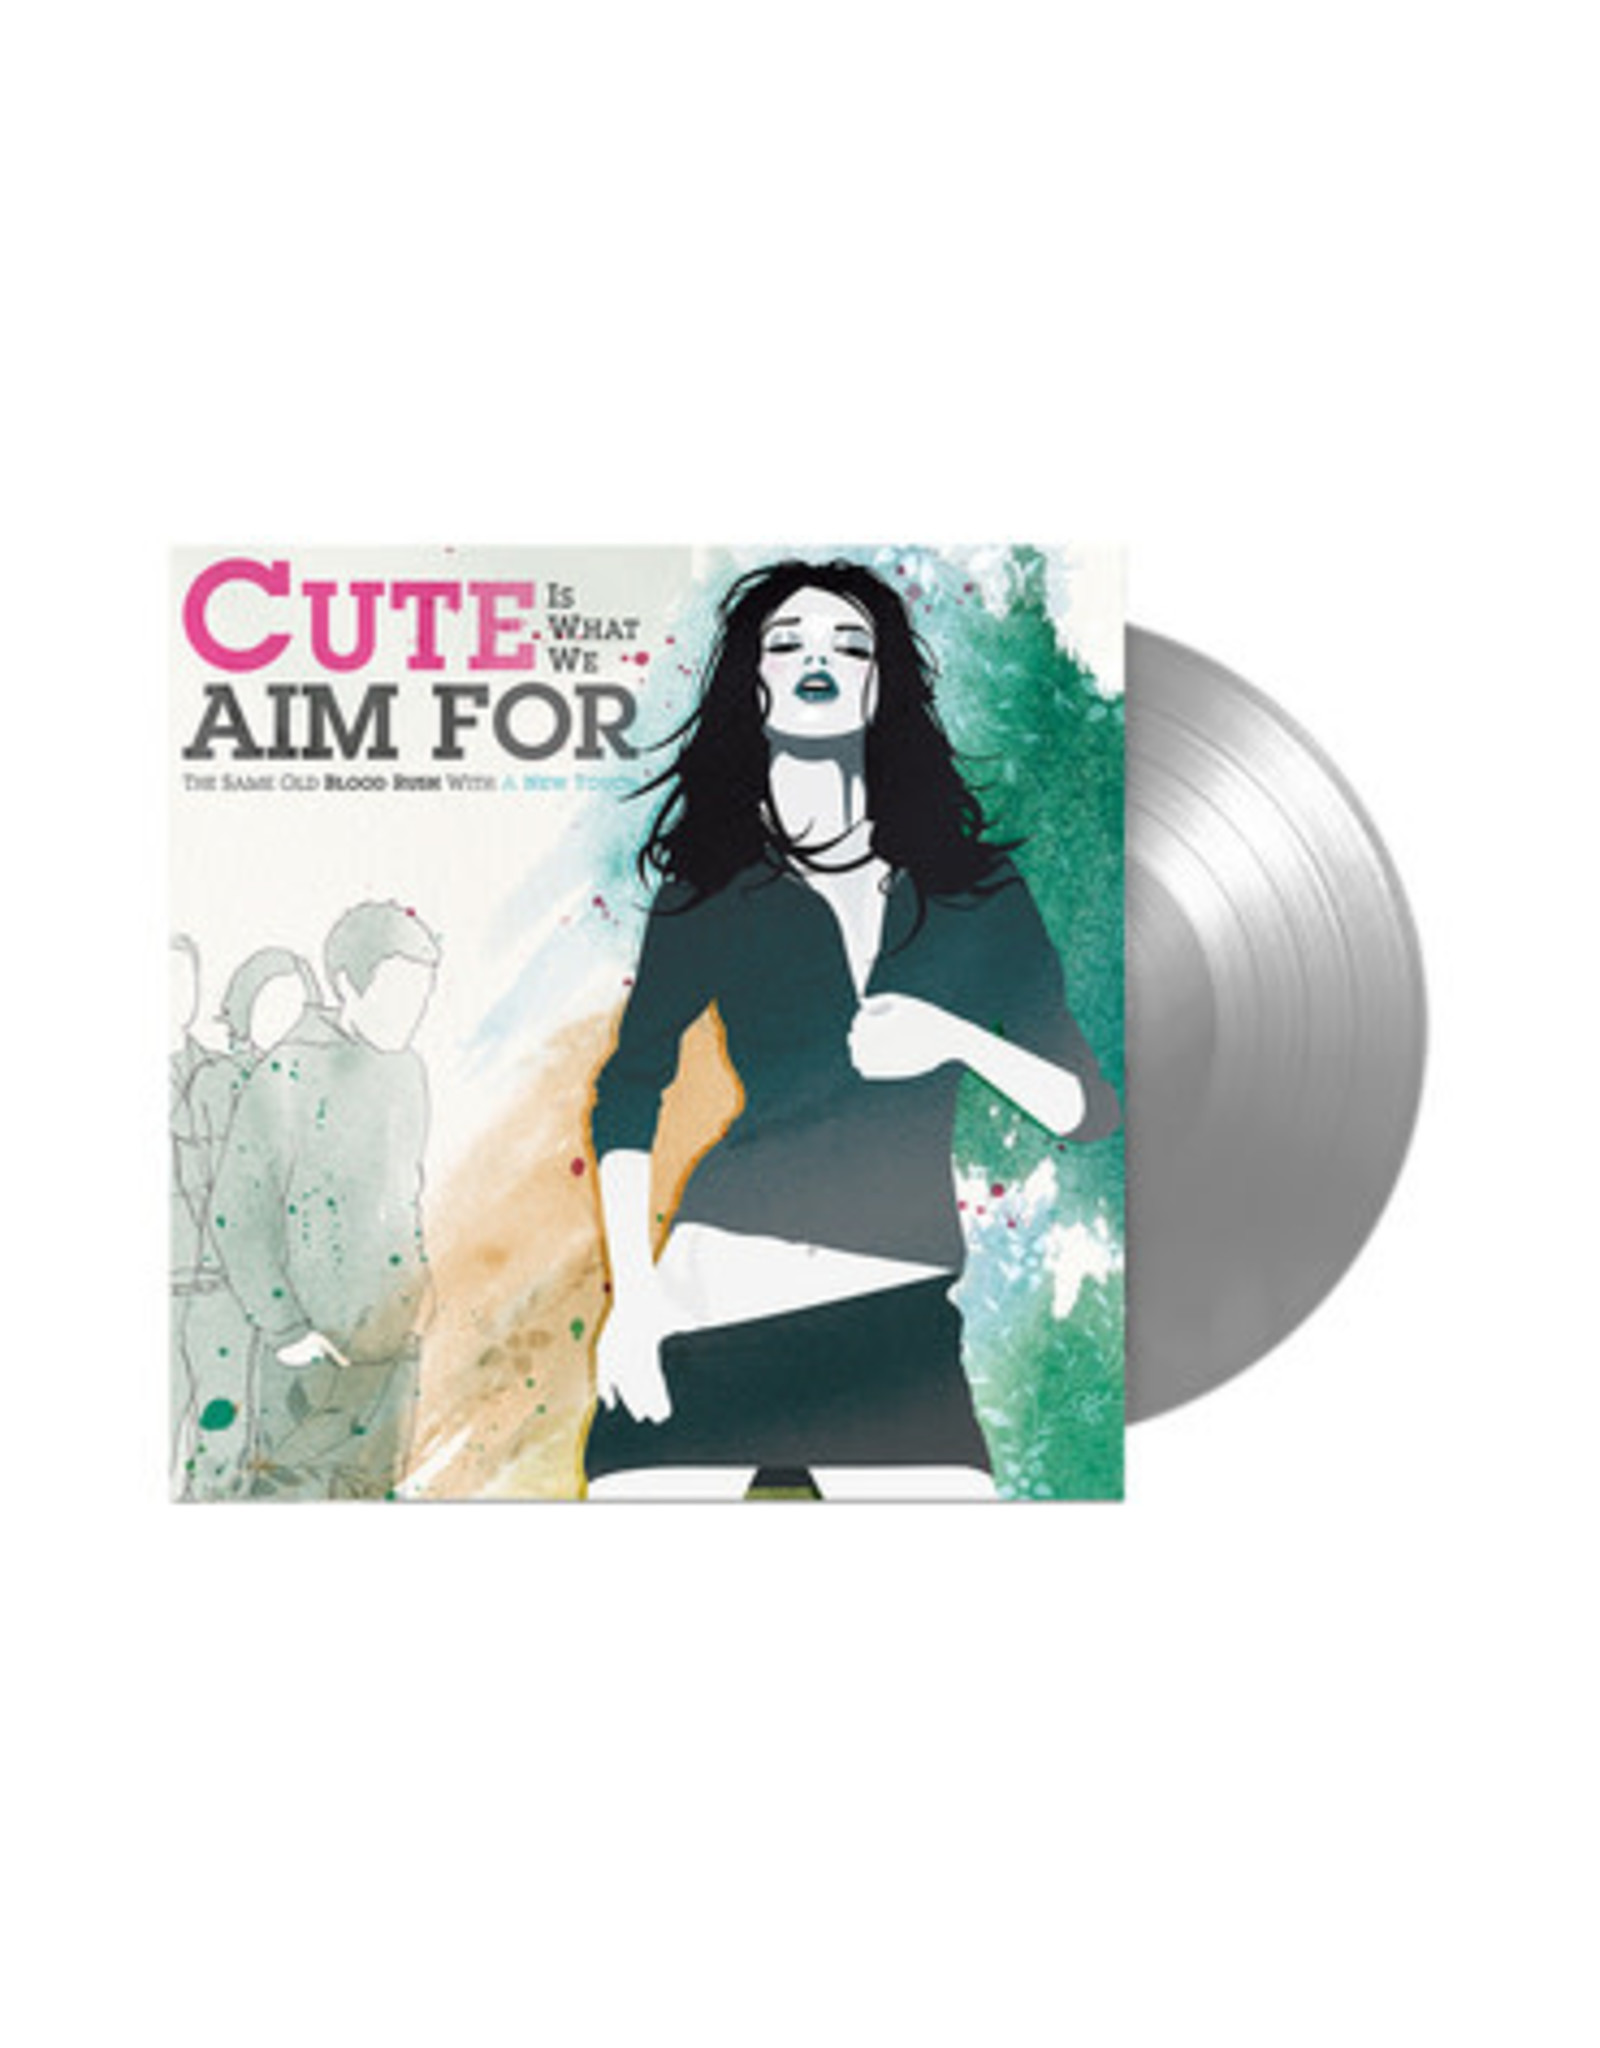 Cute Is What We Aim For - The Same Old Blood Rush With A New Touch (Ltd Silver Vinyl) LP